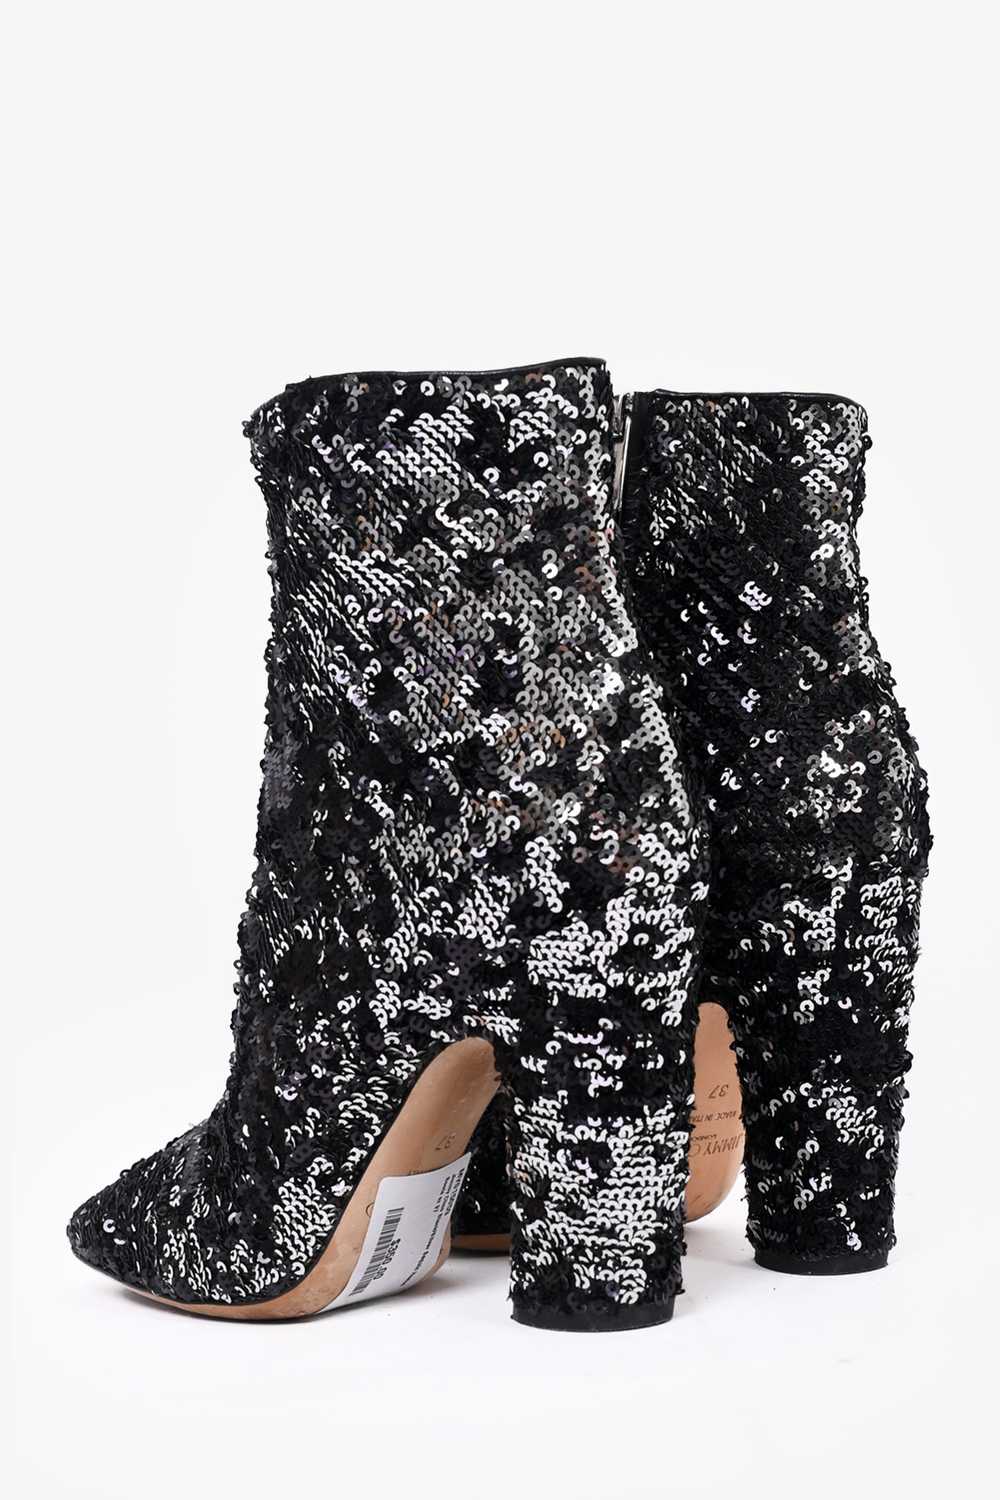 Jimmy Choo Black/Silver Sequin Heeled Boots Size … - image 4